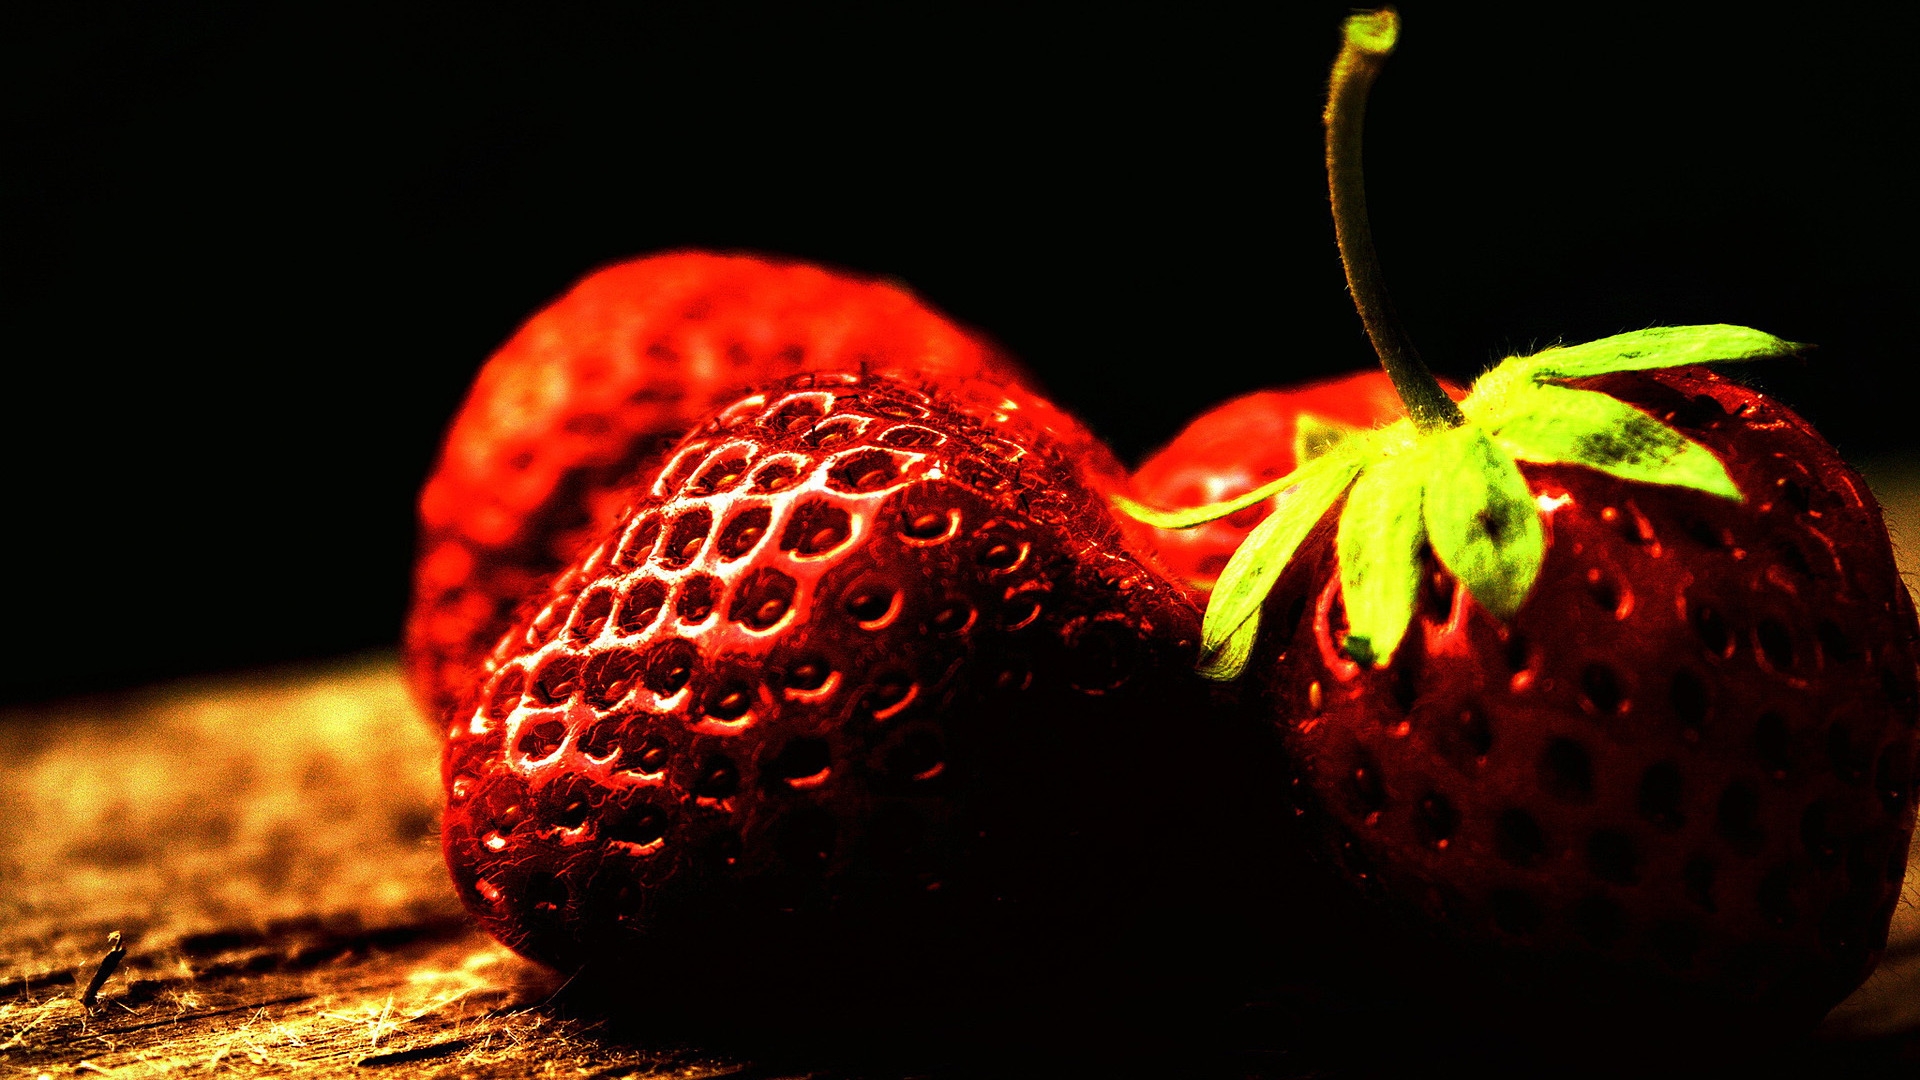 Two ripe strawberries for 1920 x 1080 HDTV 1080p resolution